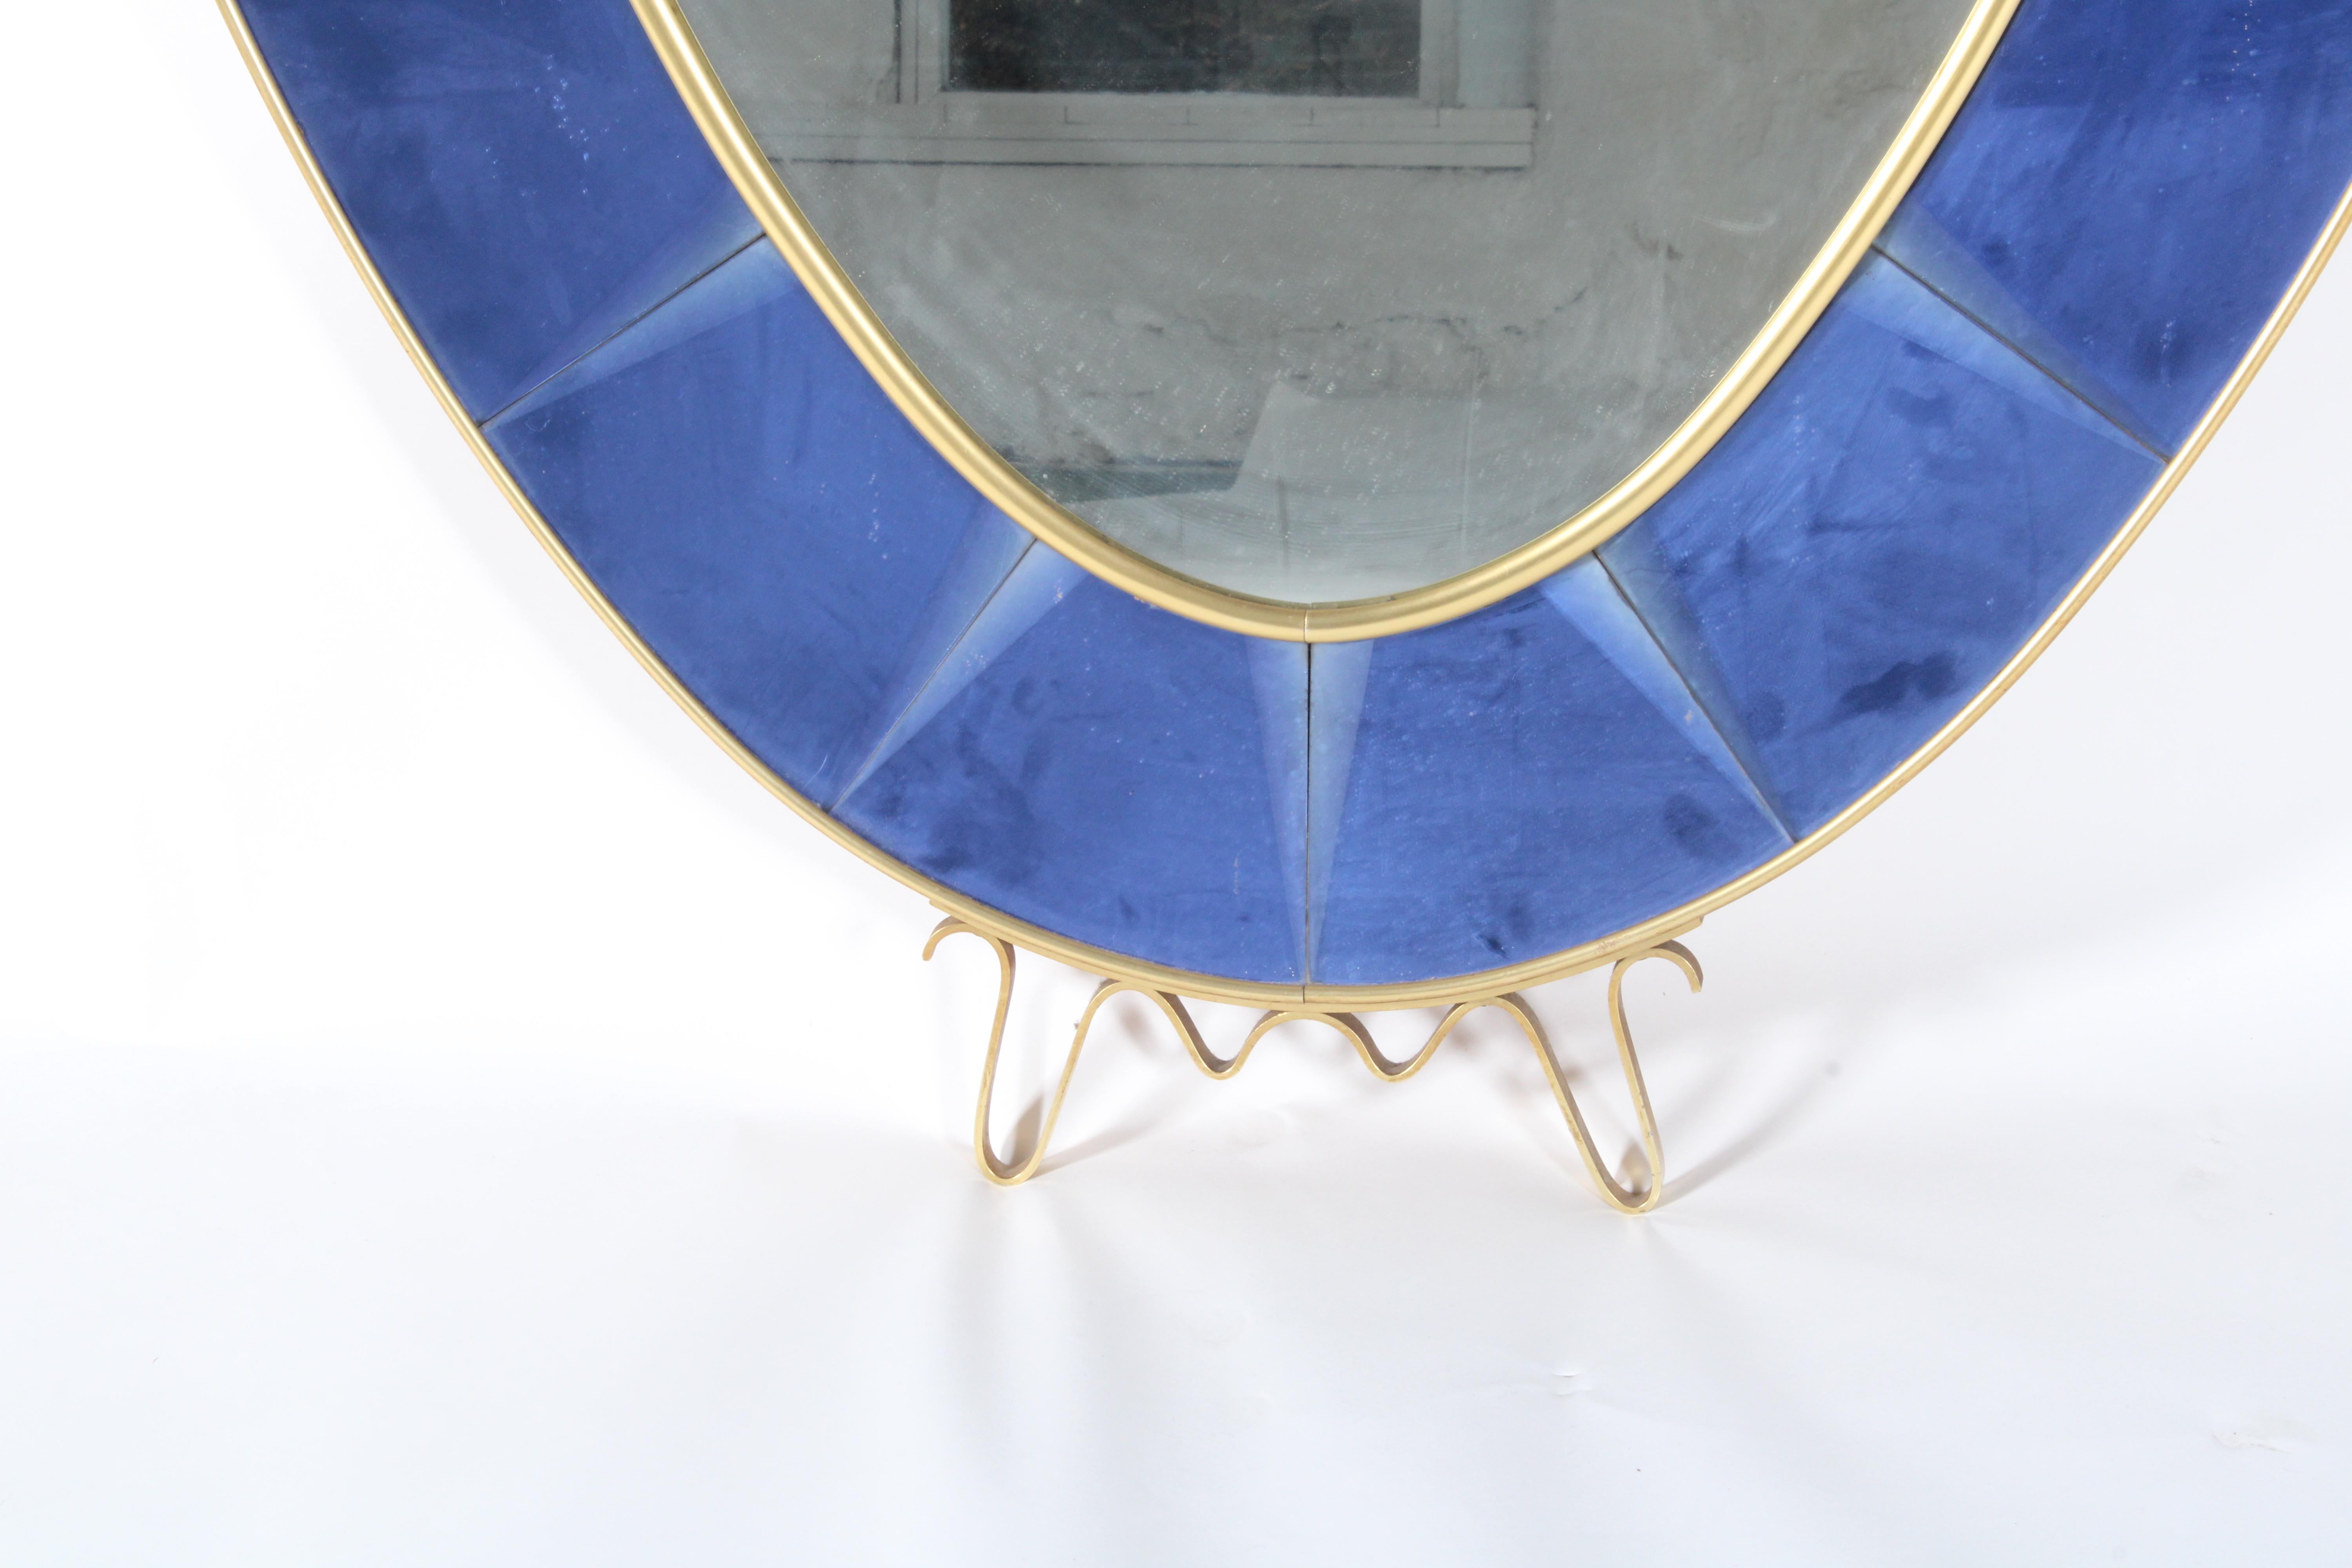 Glazed Striking Cobalt Blue Large Oval Cut Glass Floor Mirror By Cristal Arte Of Turin For Sale